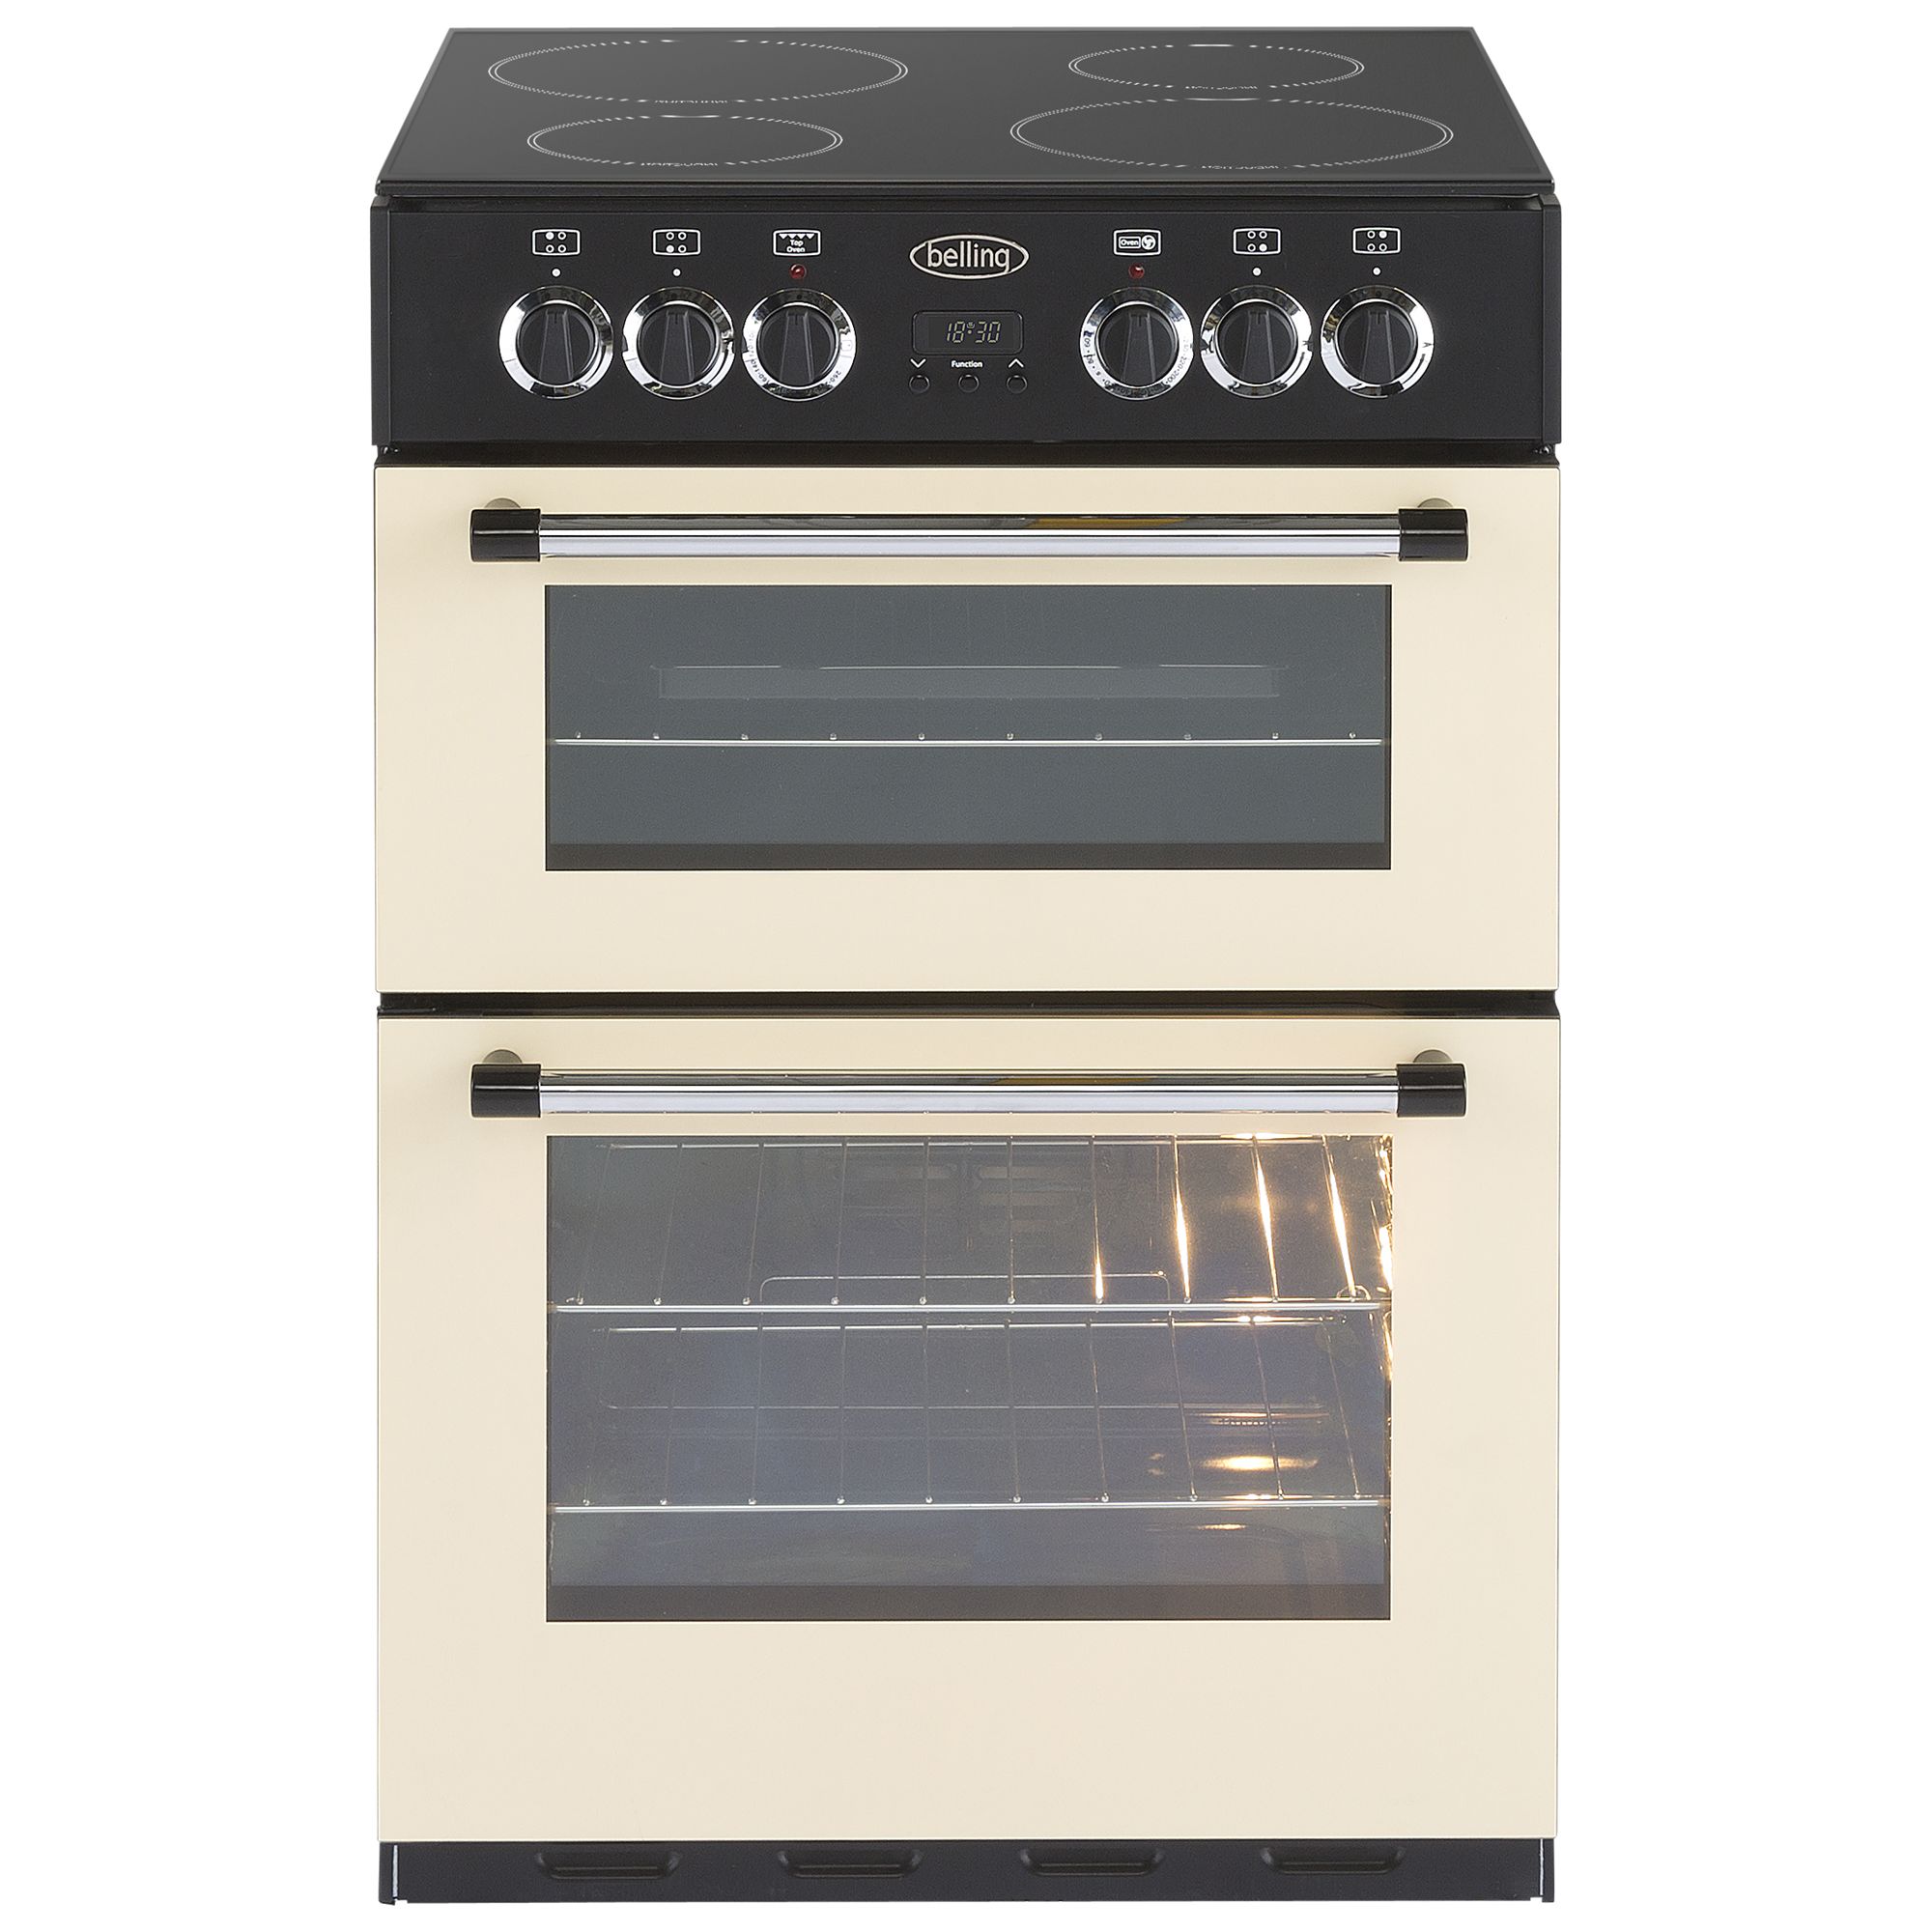 Belling Classic 60e Freestanding Electric Cooker